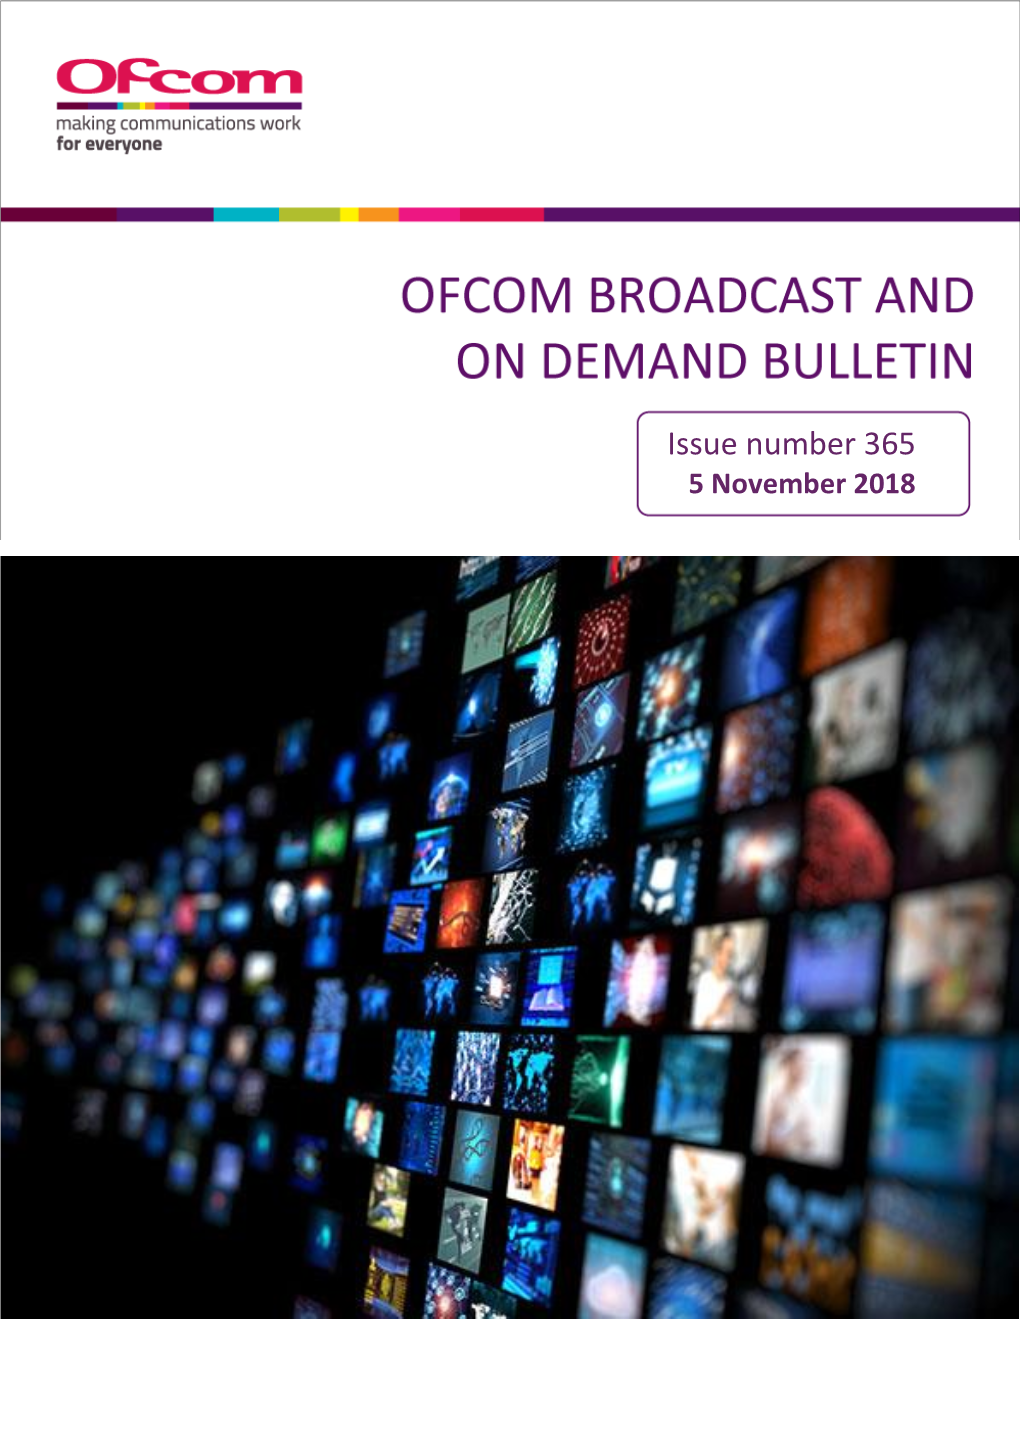 Issue 365 of Ofcom's Broadcast and on Demand Bulletin